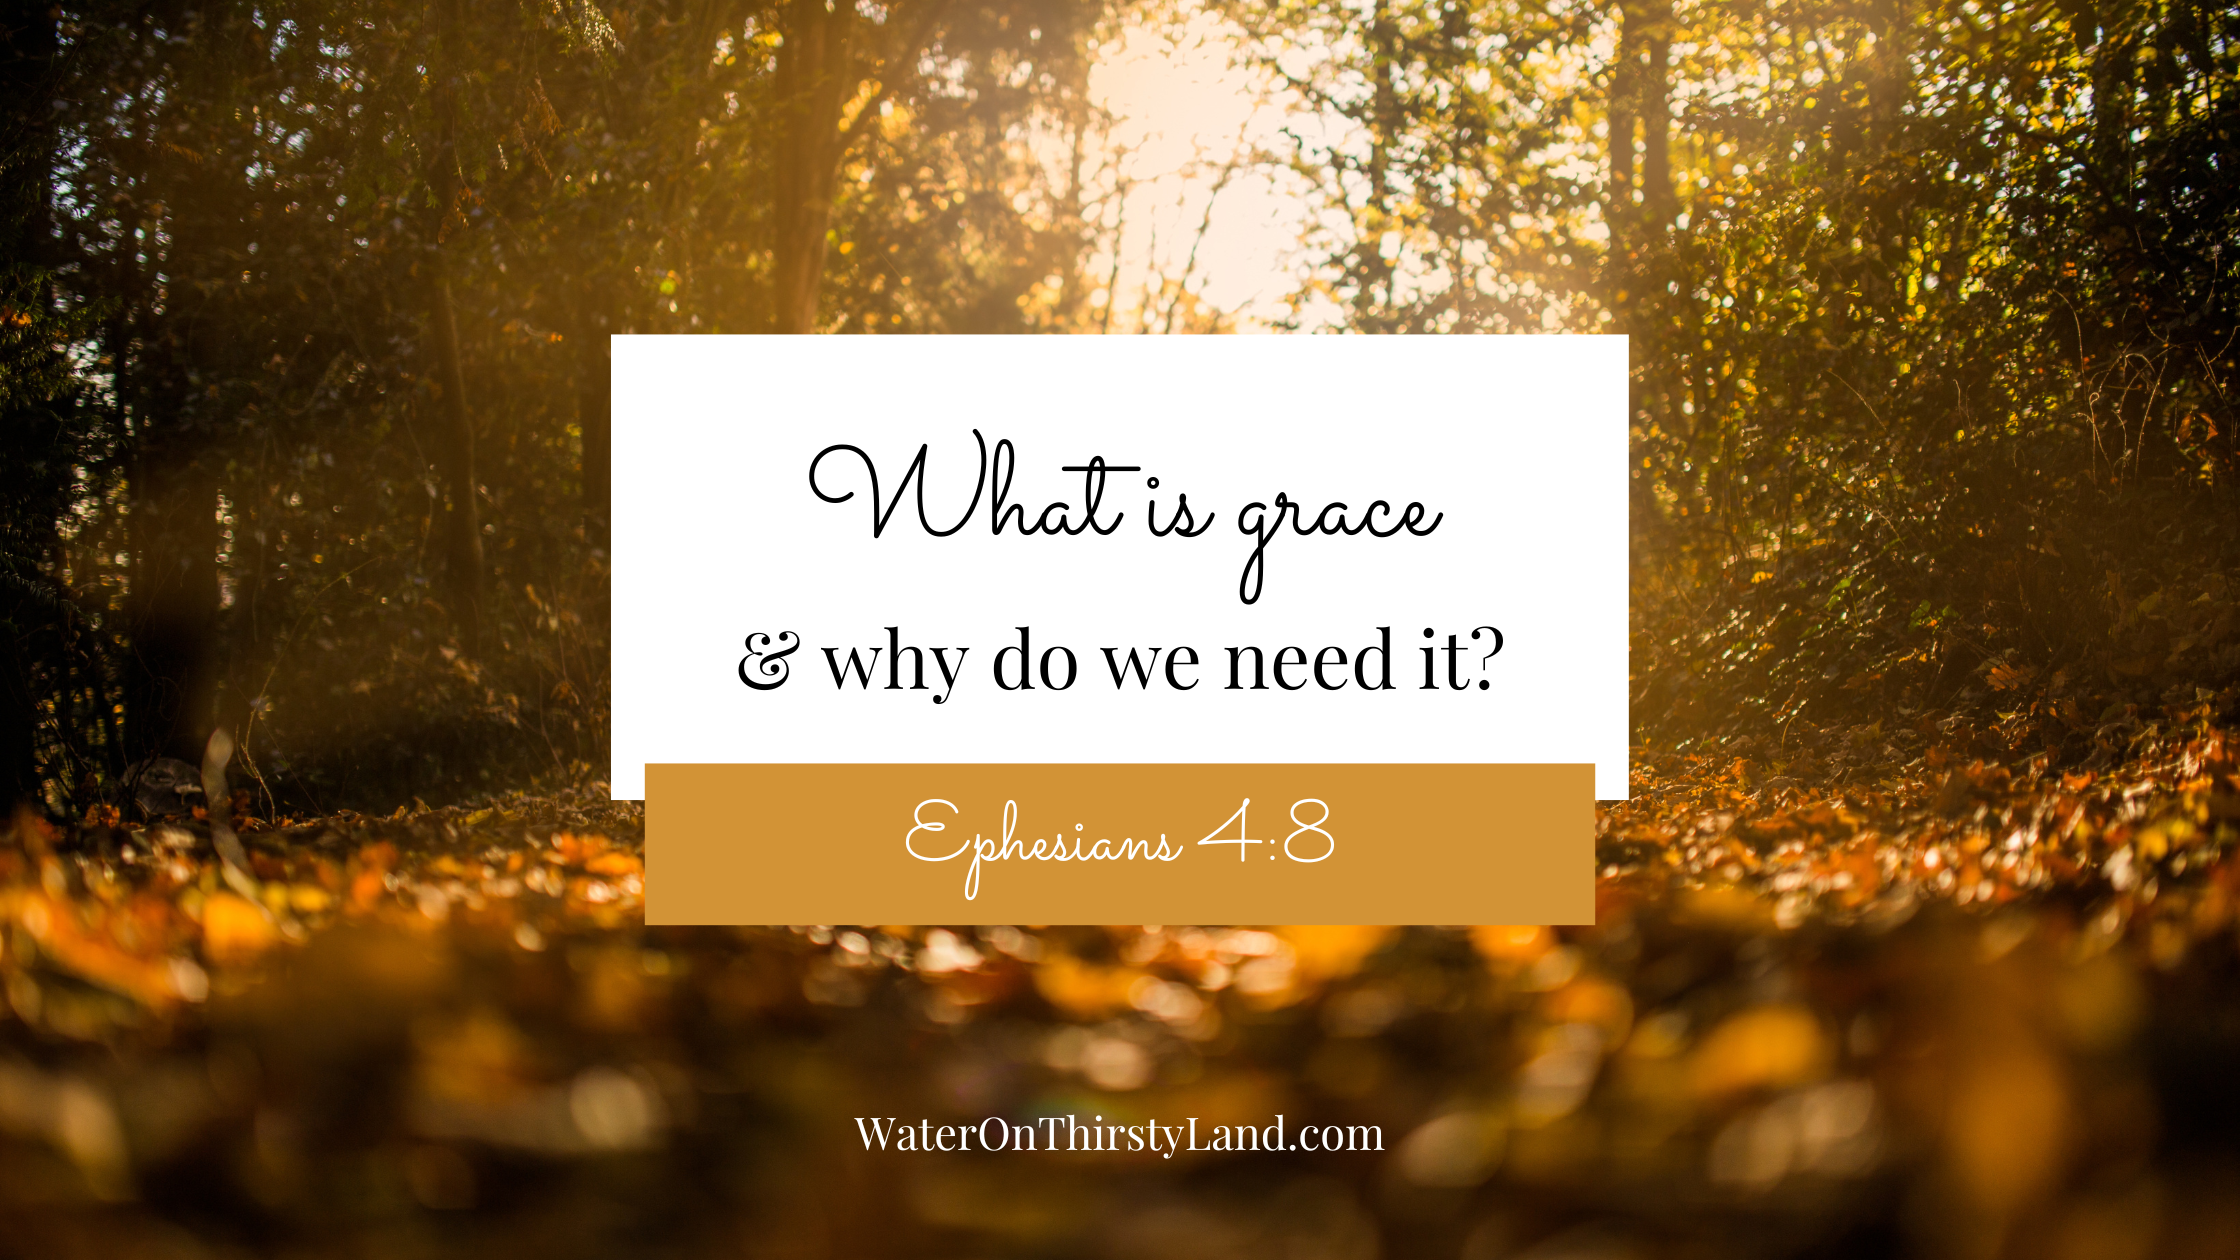 What is grace & why do we need it?